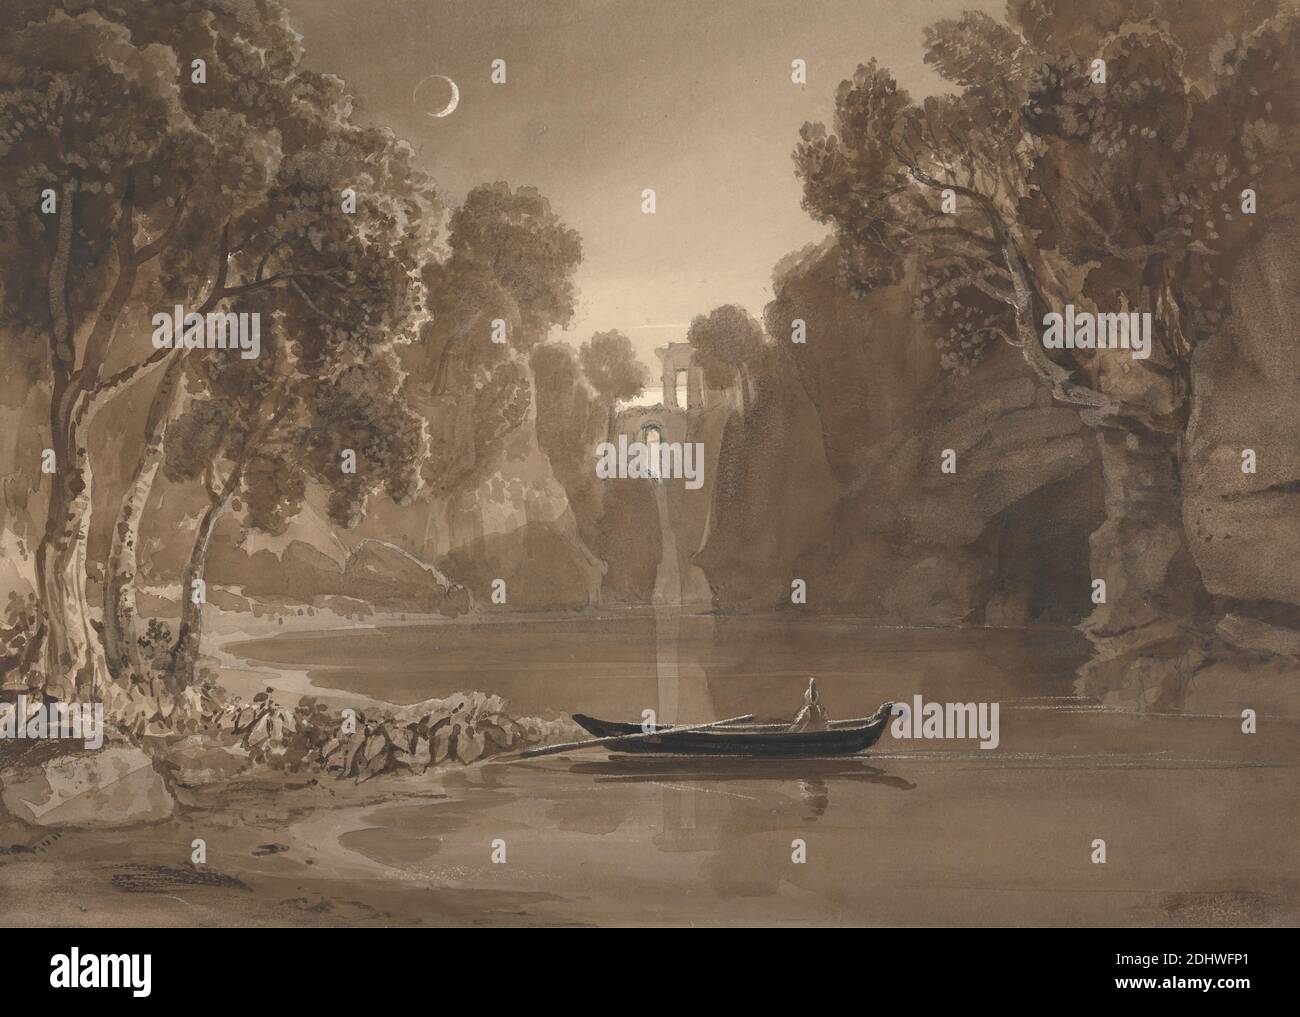 The Moonlit Lake, attributed to Samuel Jackson, 1794–1869, British, formerly attributed to Francis Danby, 1793–1861, Irish, undated, Brown wash and graphite, with scraping out on moderately thick, slightly textured, cream wove paper, Sheet: 9 1/2 x 13 3/8 inches (24.1 x 34 cm), boat, cave, genre subject, lake, landscape, moon, moonlight, night, temple, trees Stock Photo